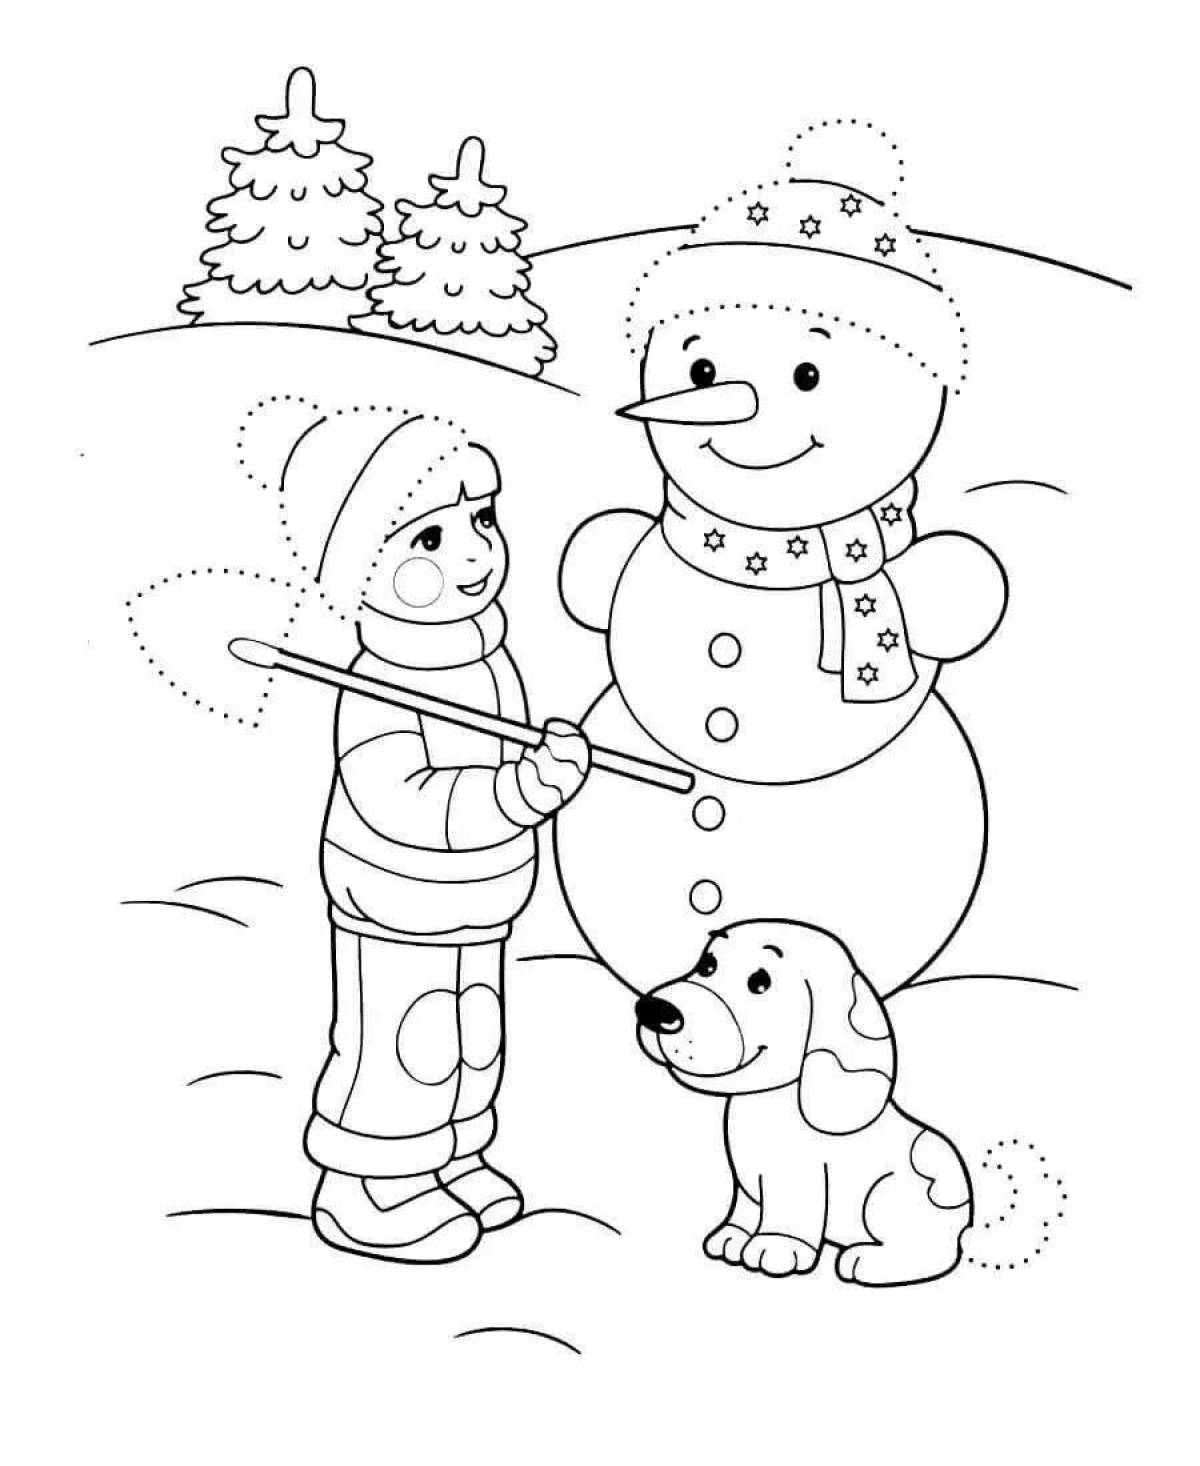 Luminous winter coloring book for children 5 years old